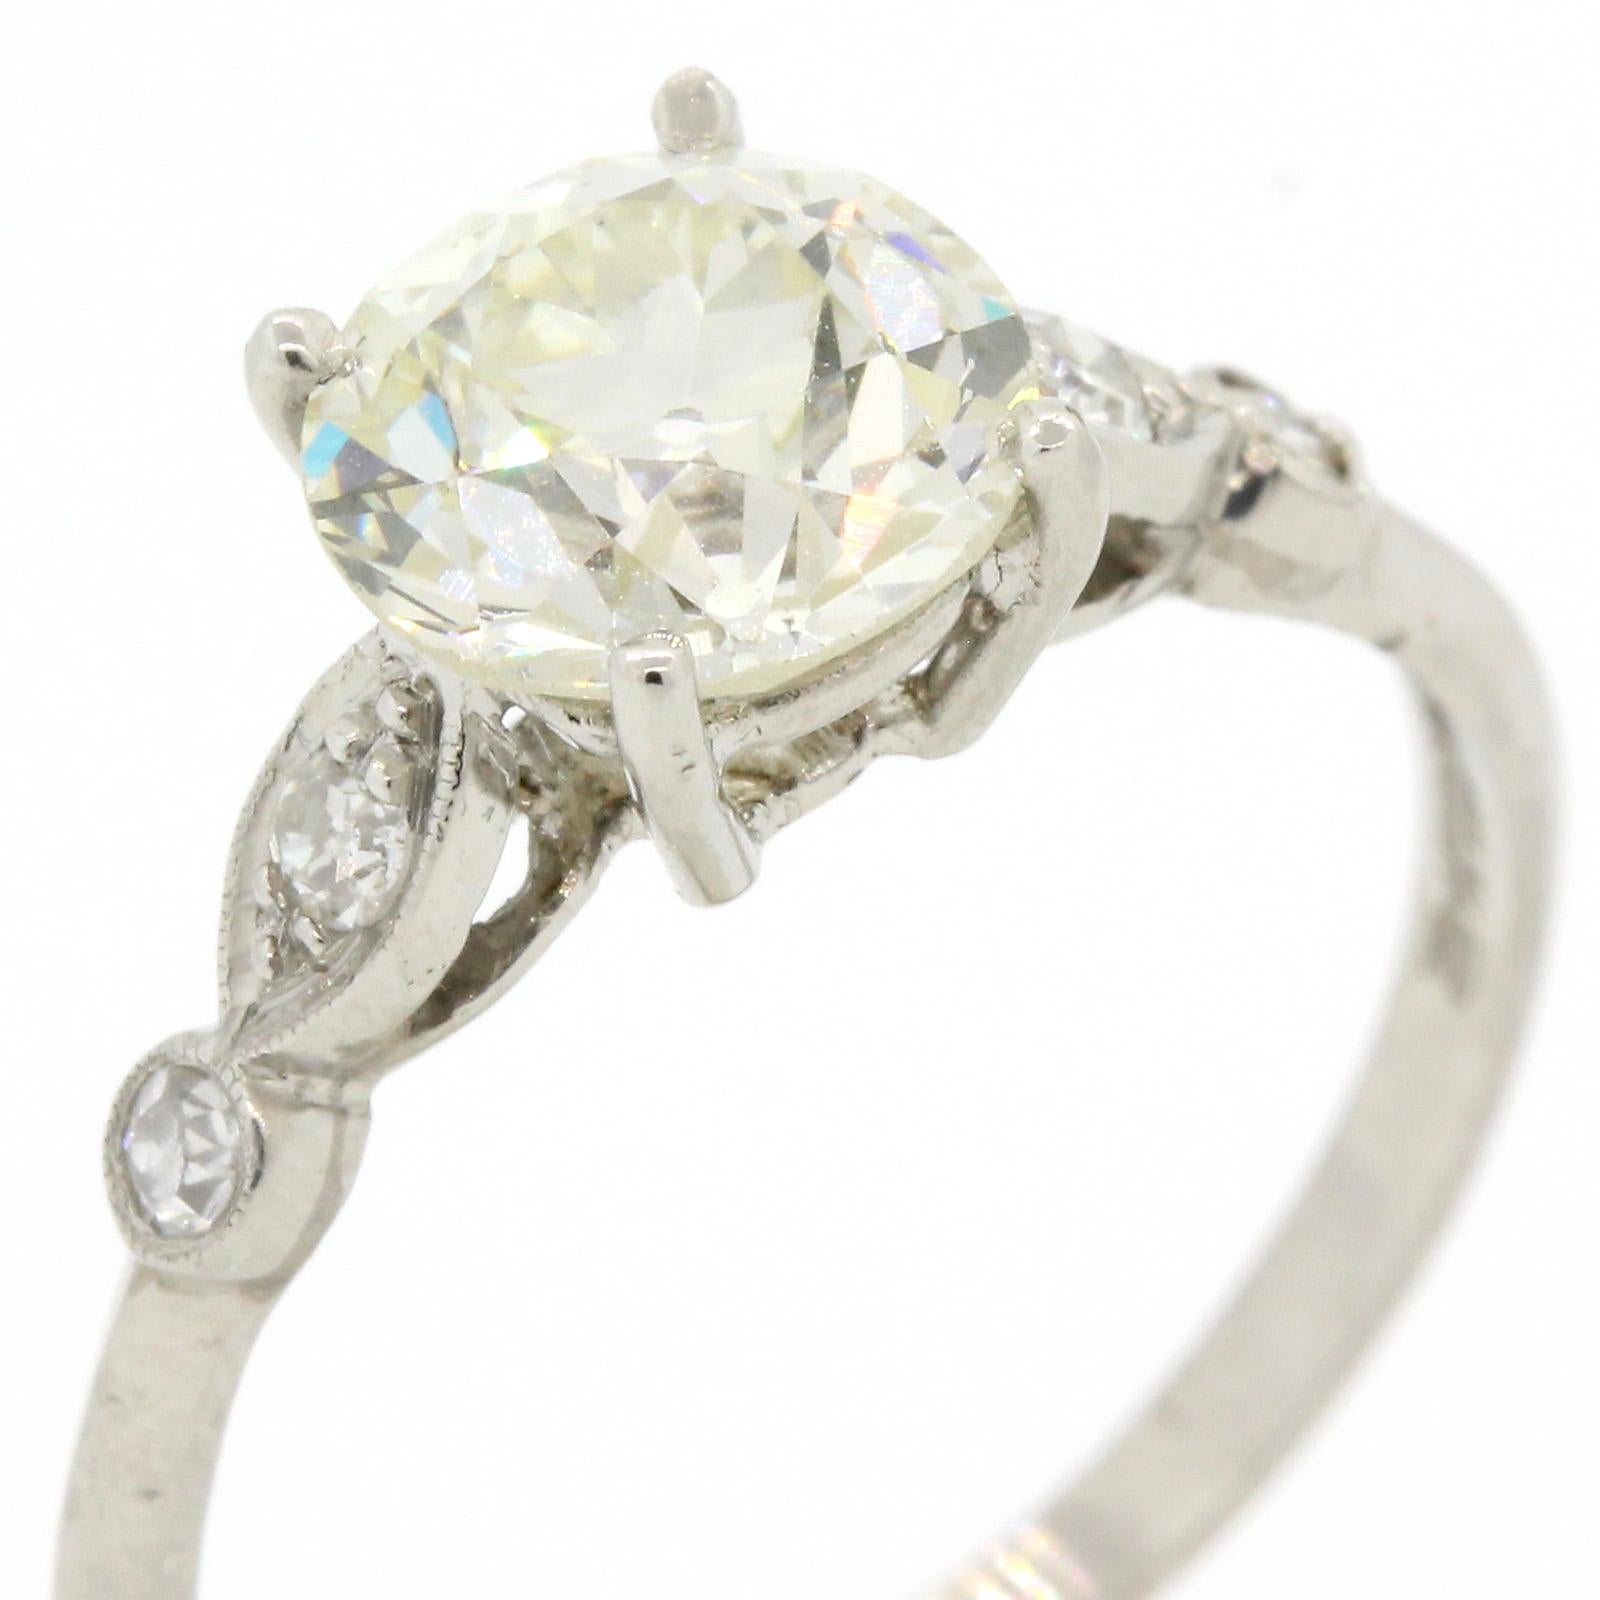 Traditional and gorgeous!  A 1940s platinum ring flaunting a 1.64 carat Old European Cut Diamond,  E.G.L. USA certified K color - VS2 clarity; measuring 7.43 x 7.16 x 4.82  mm.  The simple  setting is accented with marquise and round design details